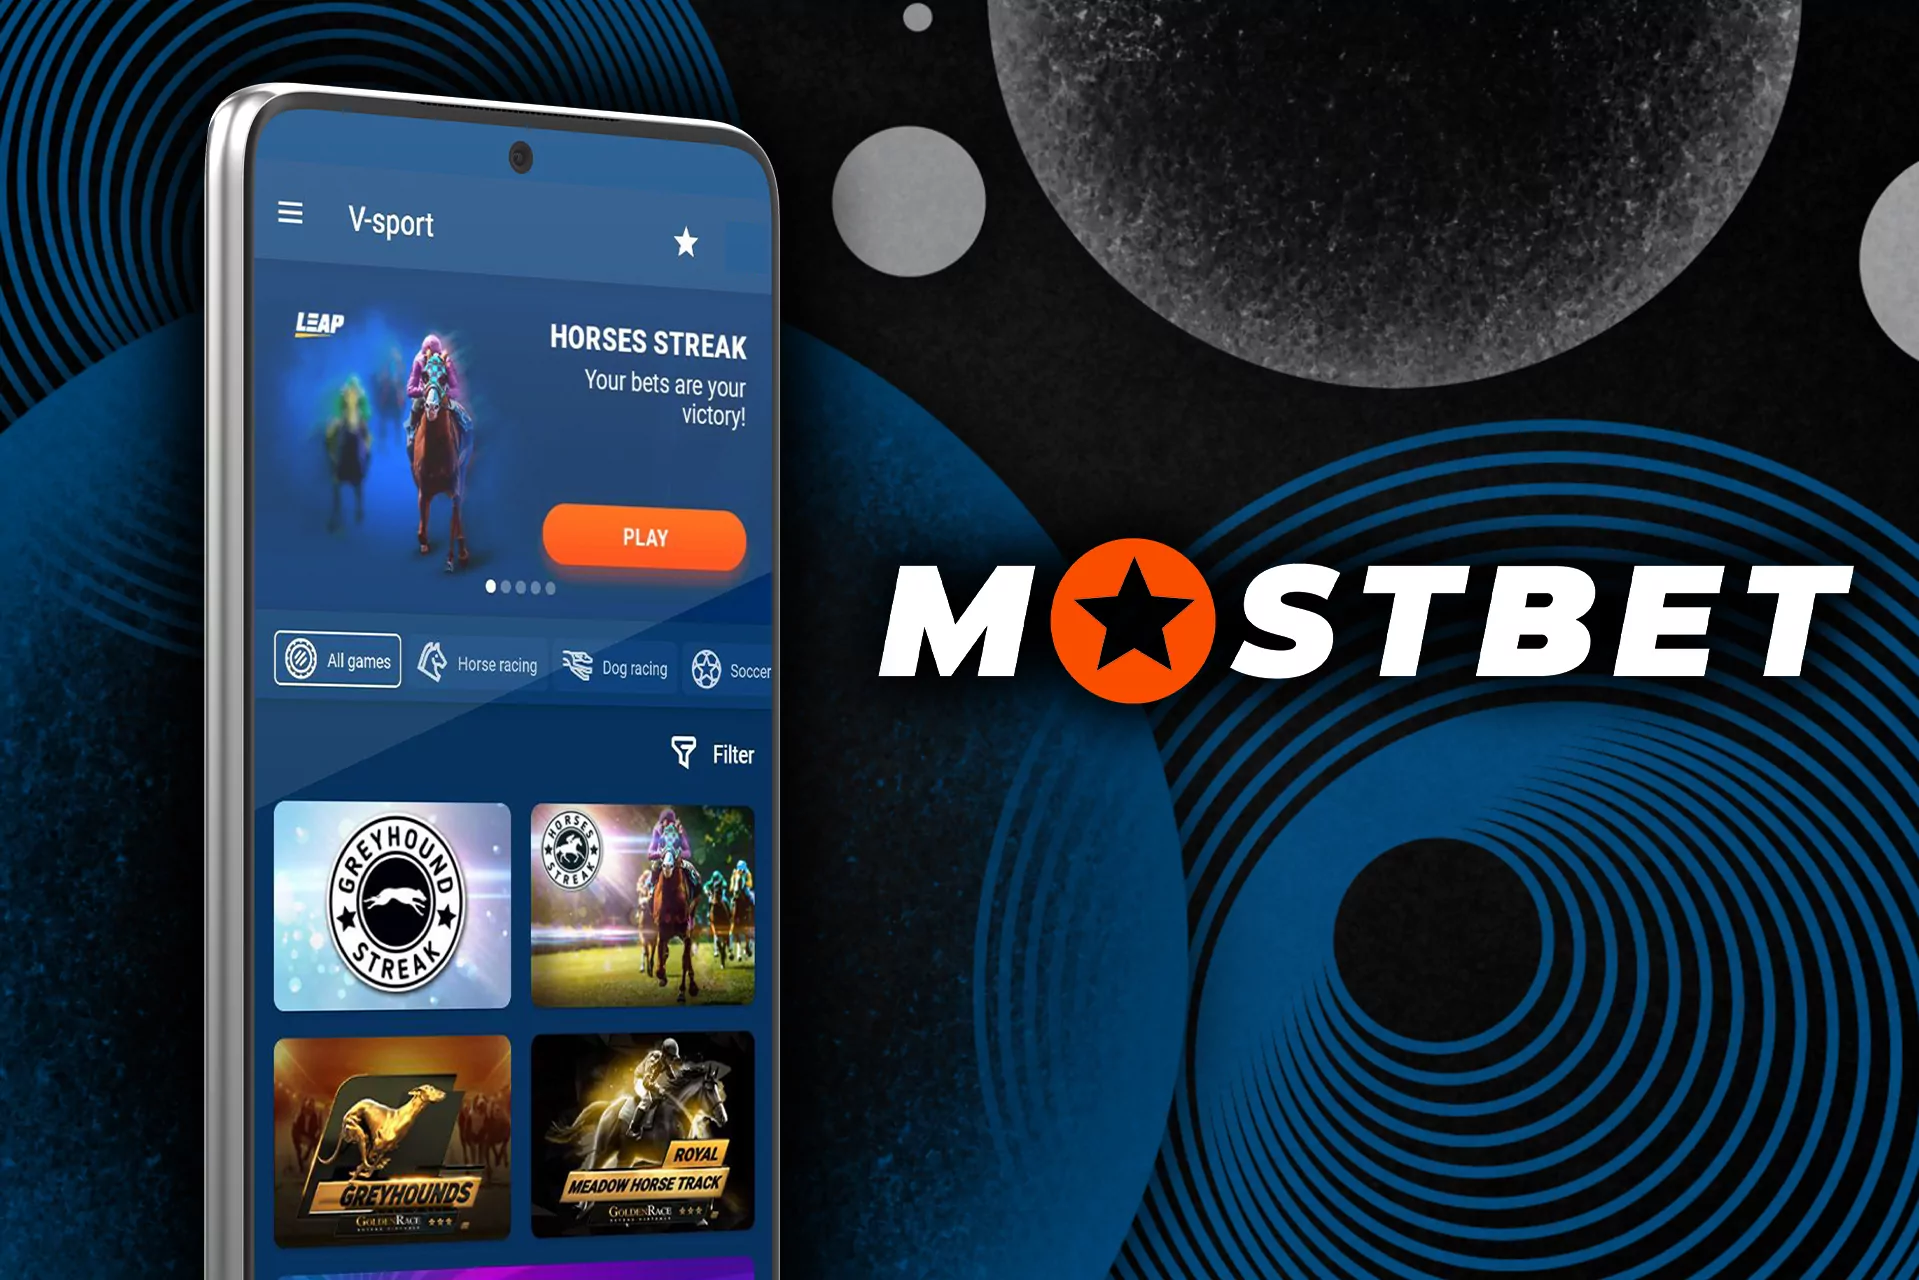 Place bets on virtual sport through the Mostbet app.